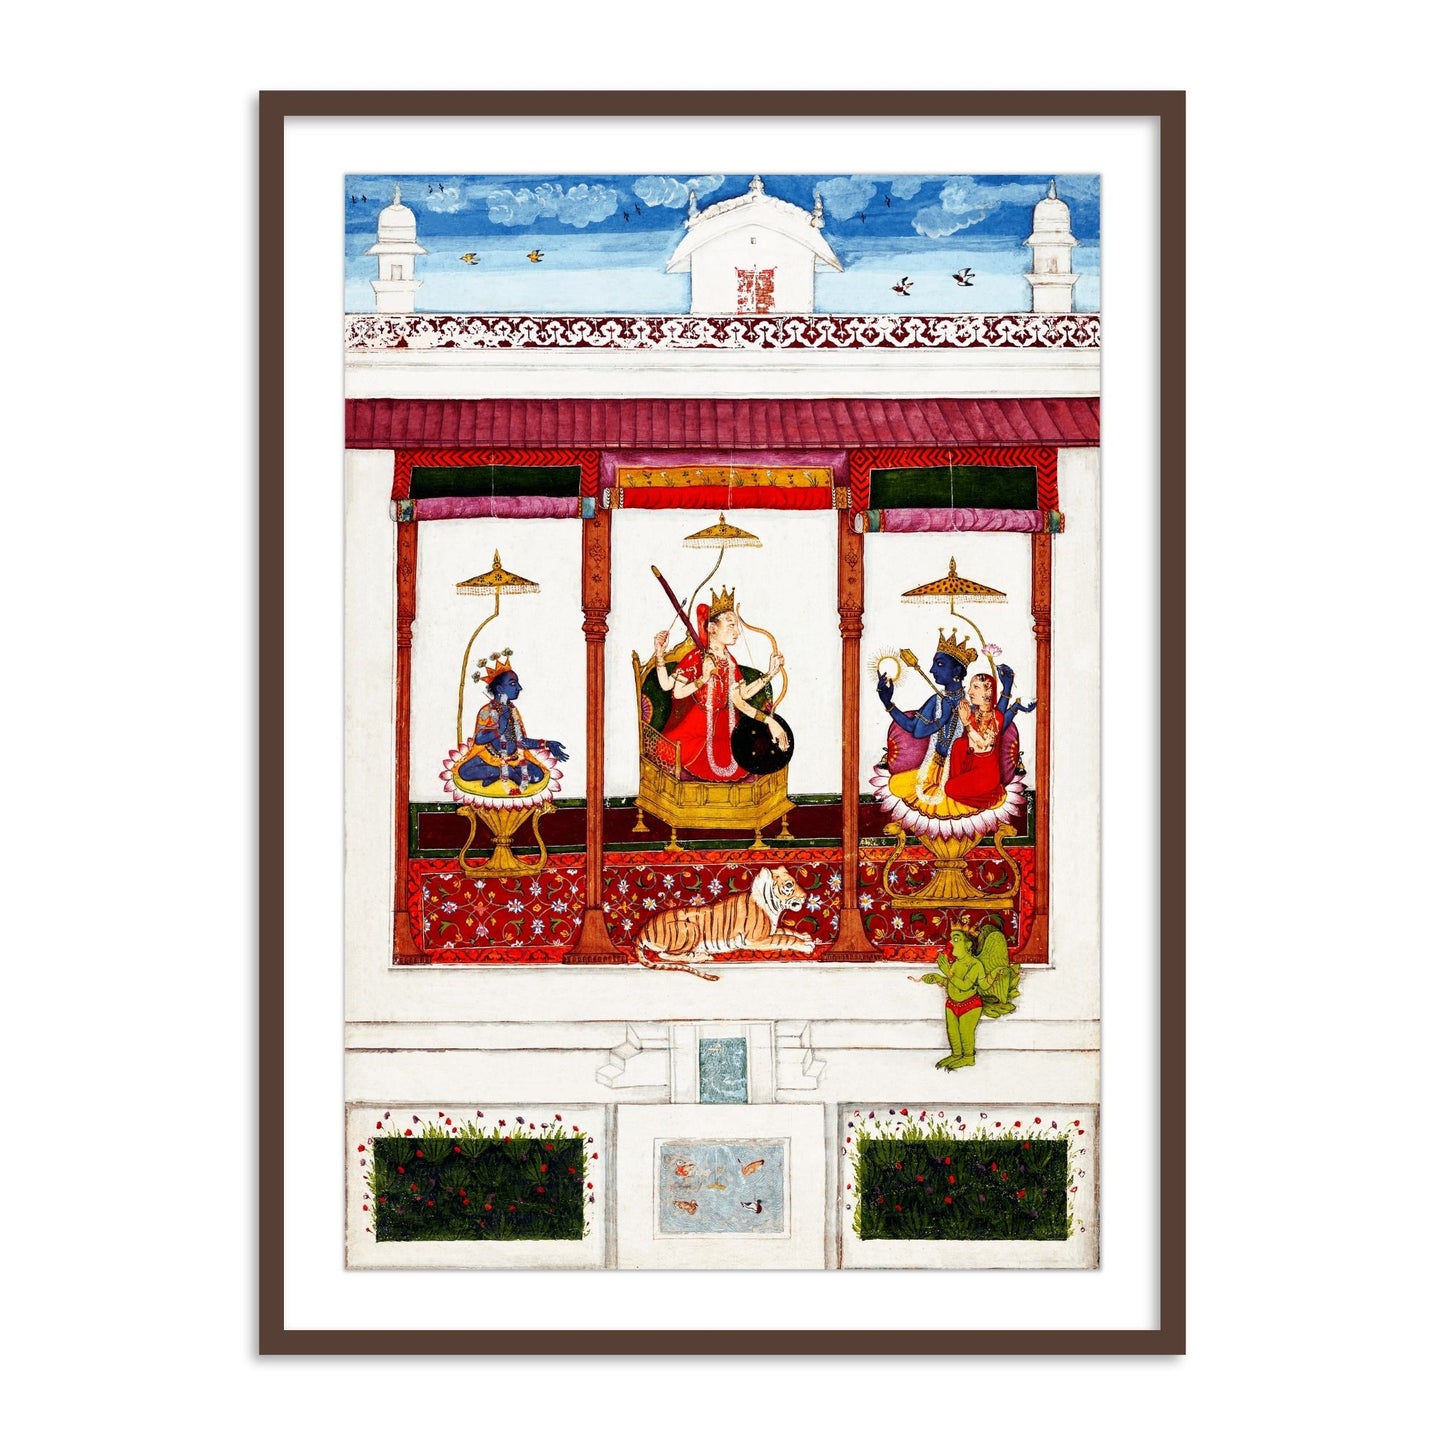 Devi with Krishna and Vishnu in a Palace Framed Wall Art | Home Decor Paintings